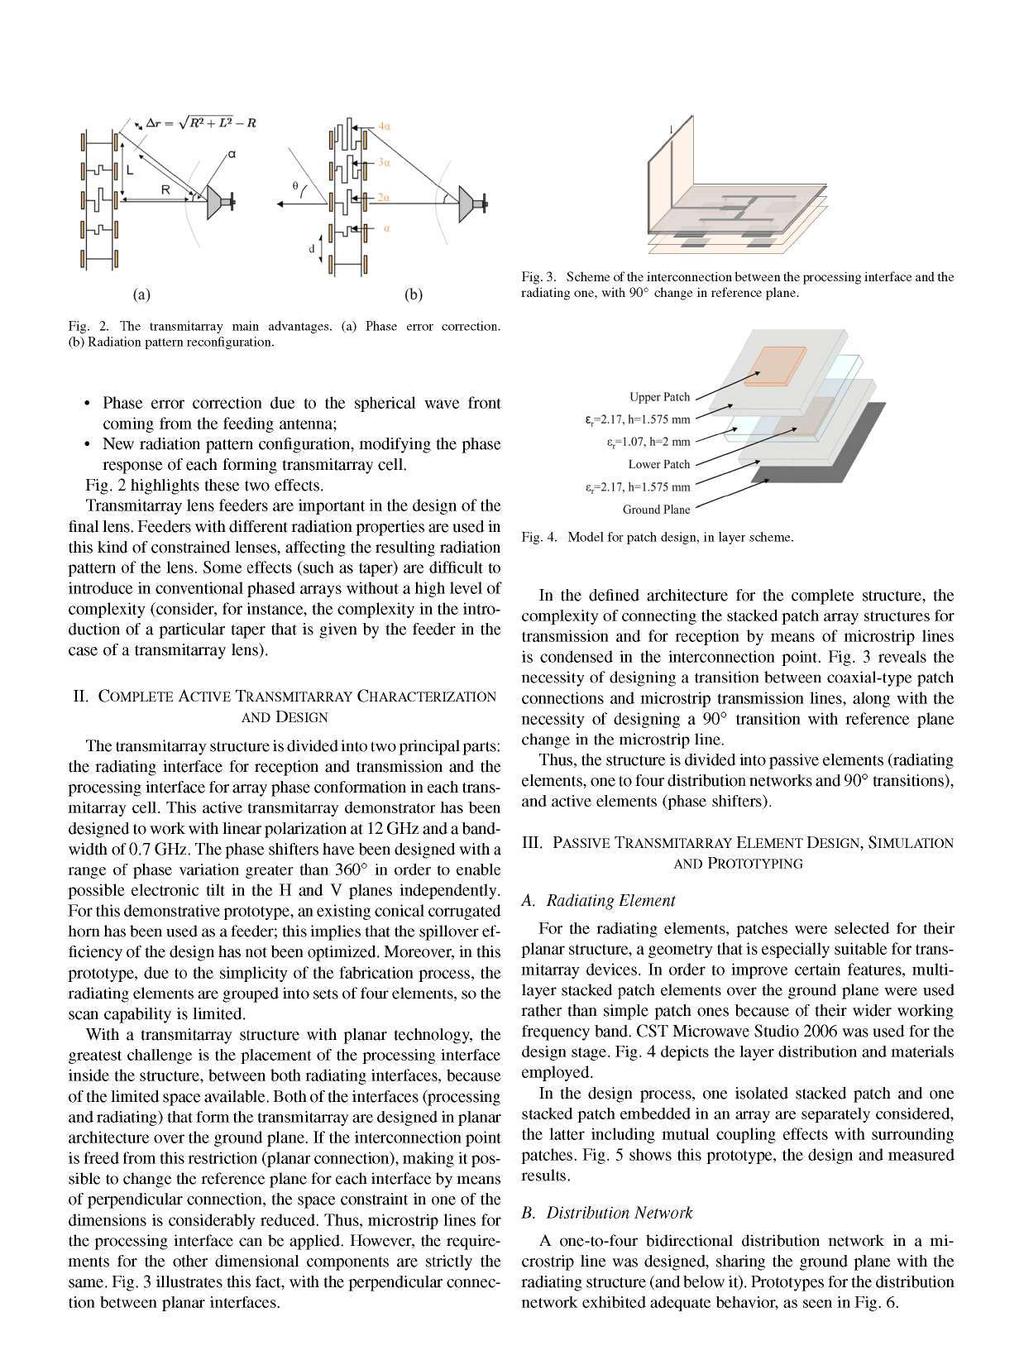 / v Ar=v/i? 2 + 2 -ií Fig. 3. Scheme of the interconnection between the processing interface and the radiating one, with 9 change in reference plane. Fig. 2. The transmitarray main advantages, Phase error correction, Radiation pattern reconfiguration.